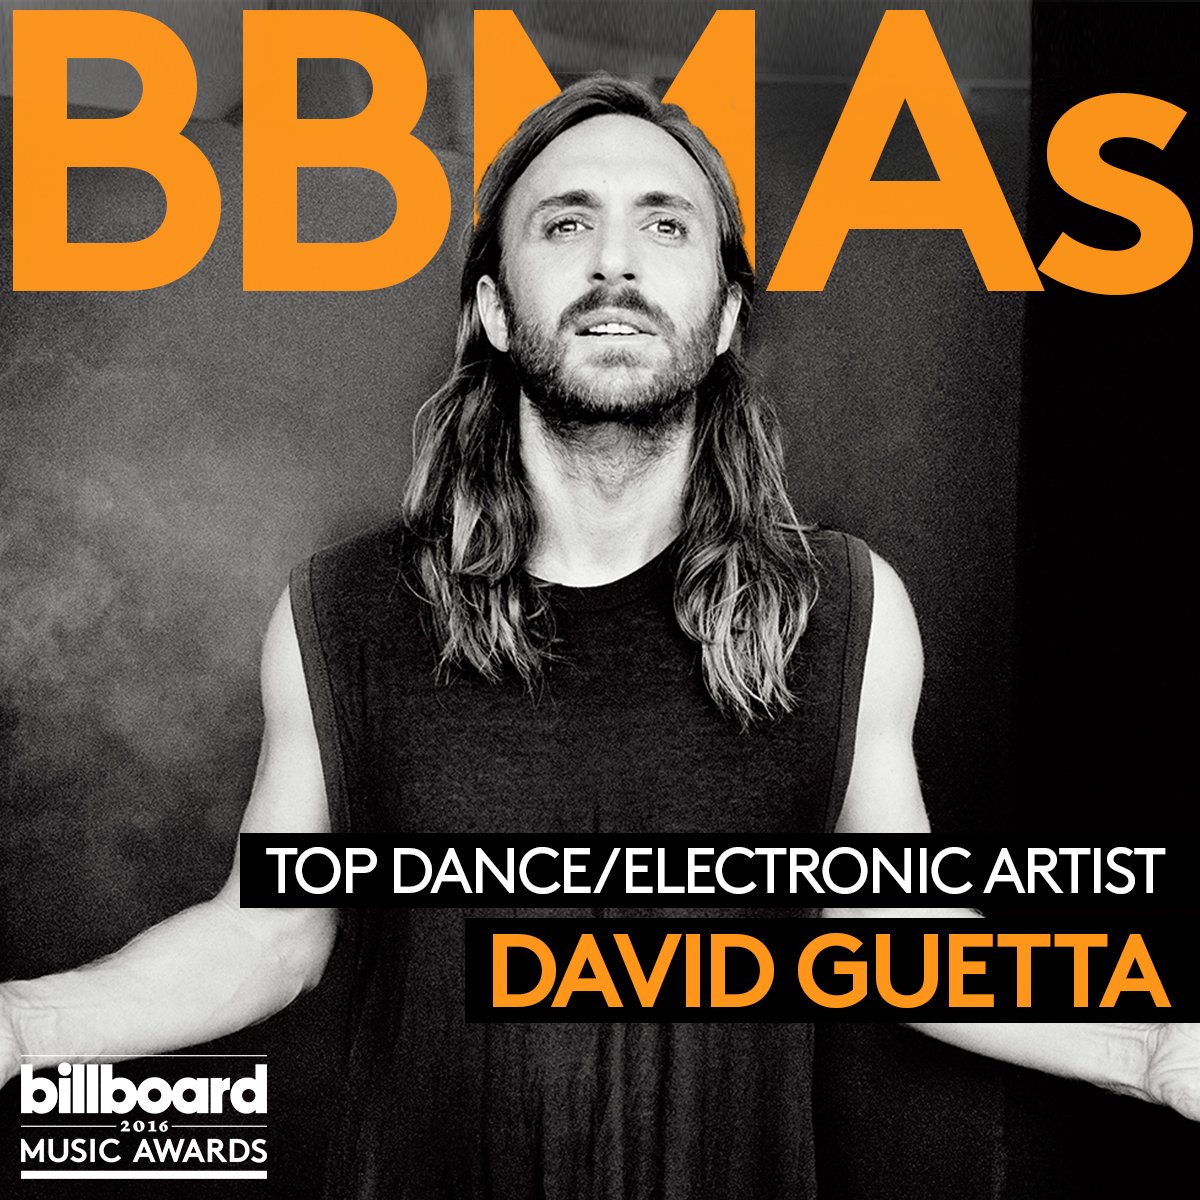 RT @BBMAs: The party is on for @davidguetta! He was named Top Dance/Electronic Artist at the #BBMAs! https://t.co/lrW570Nnyk